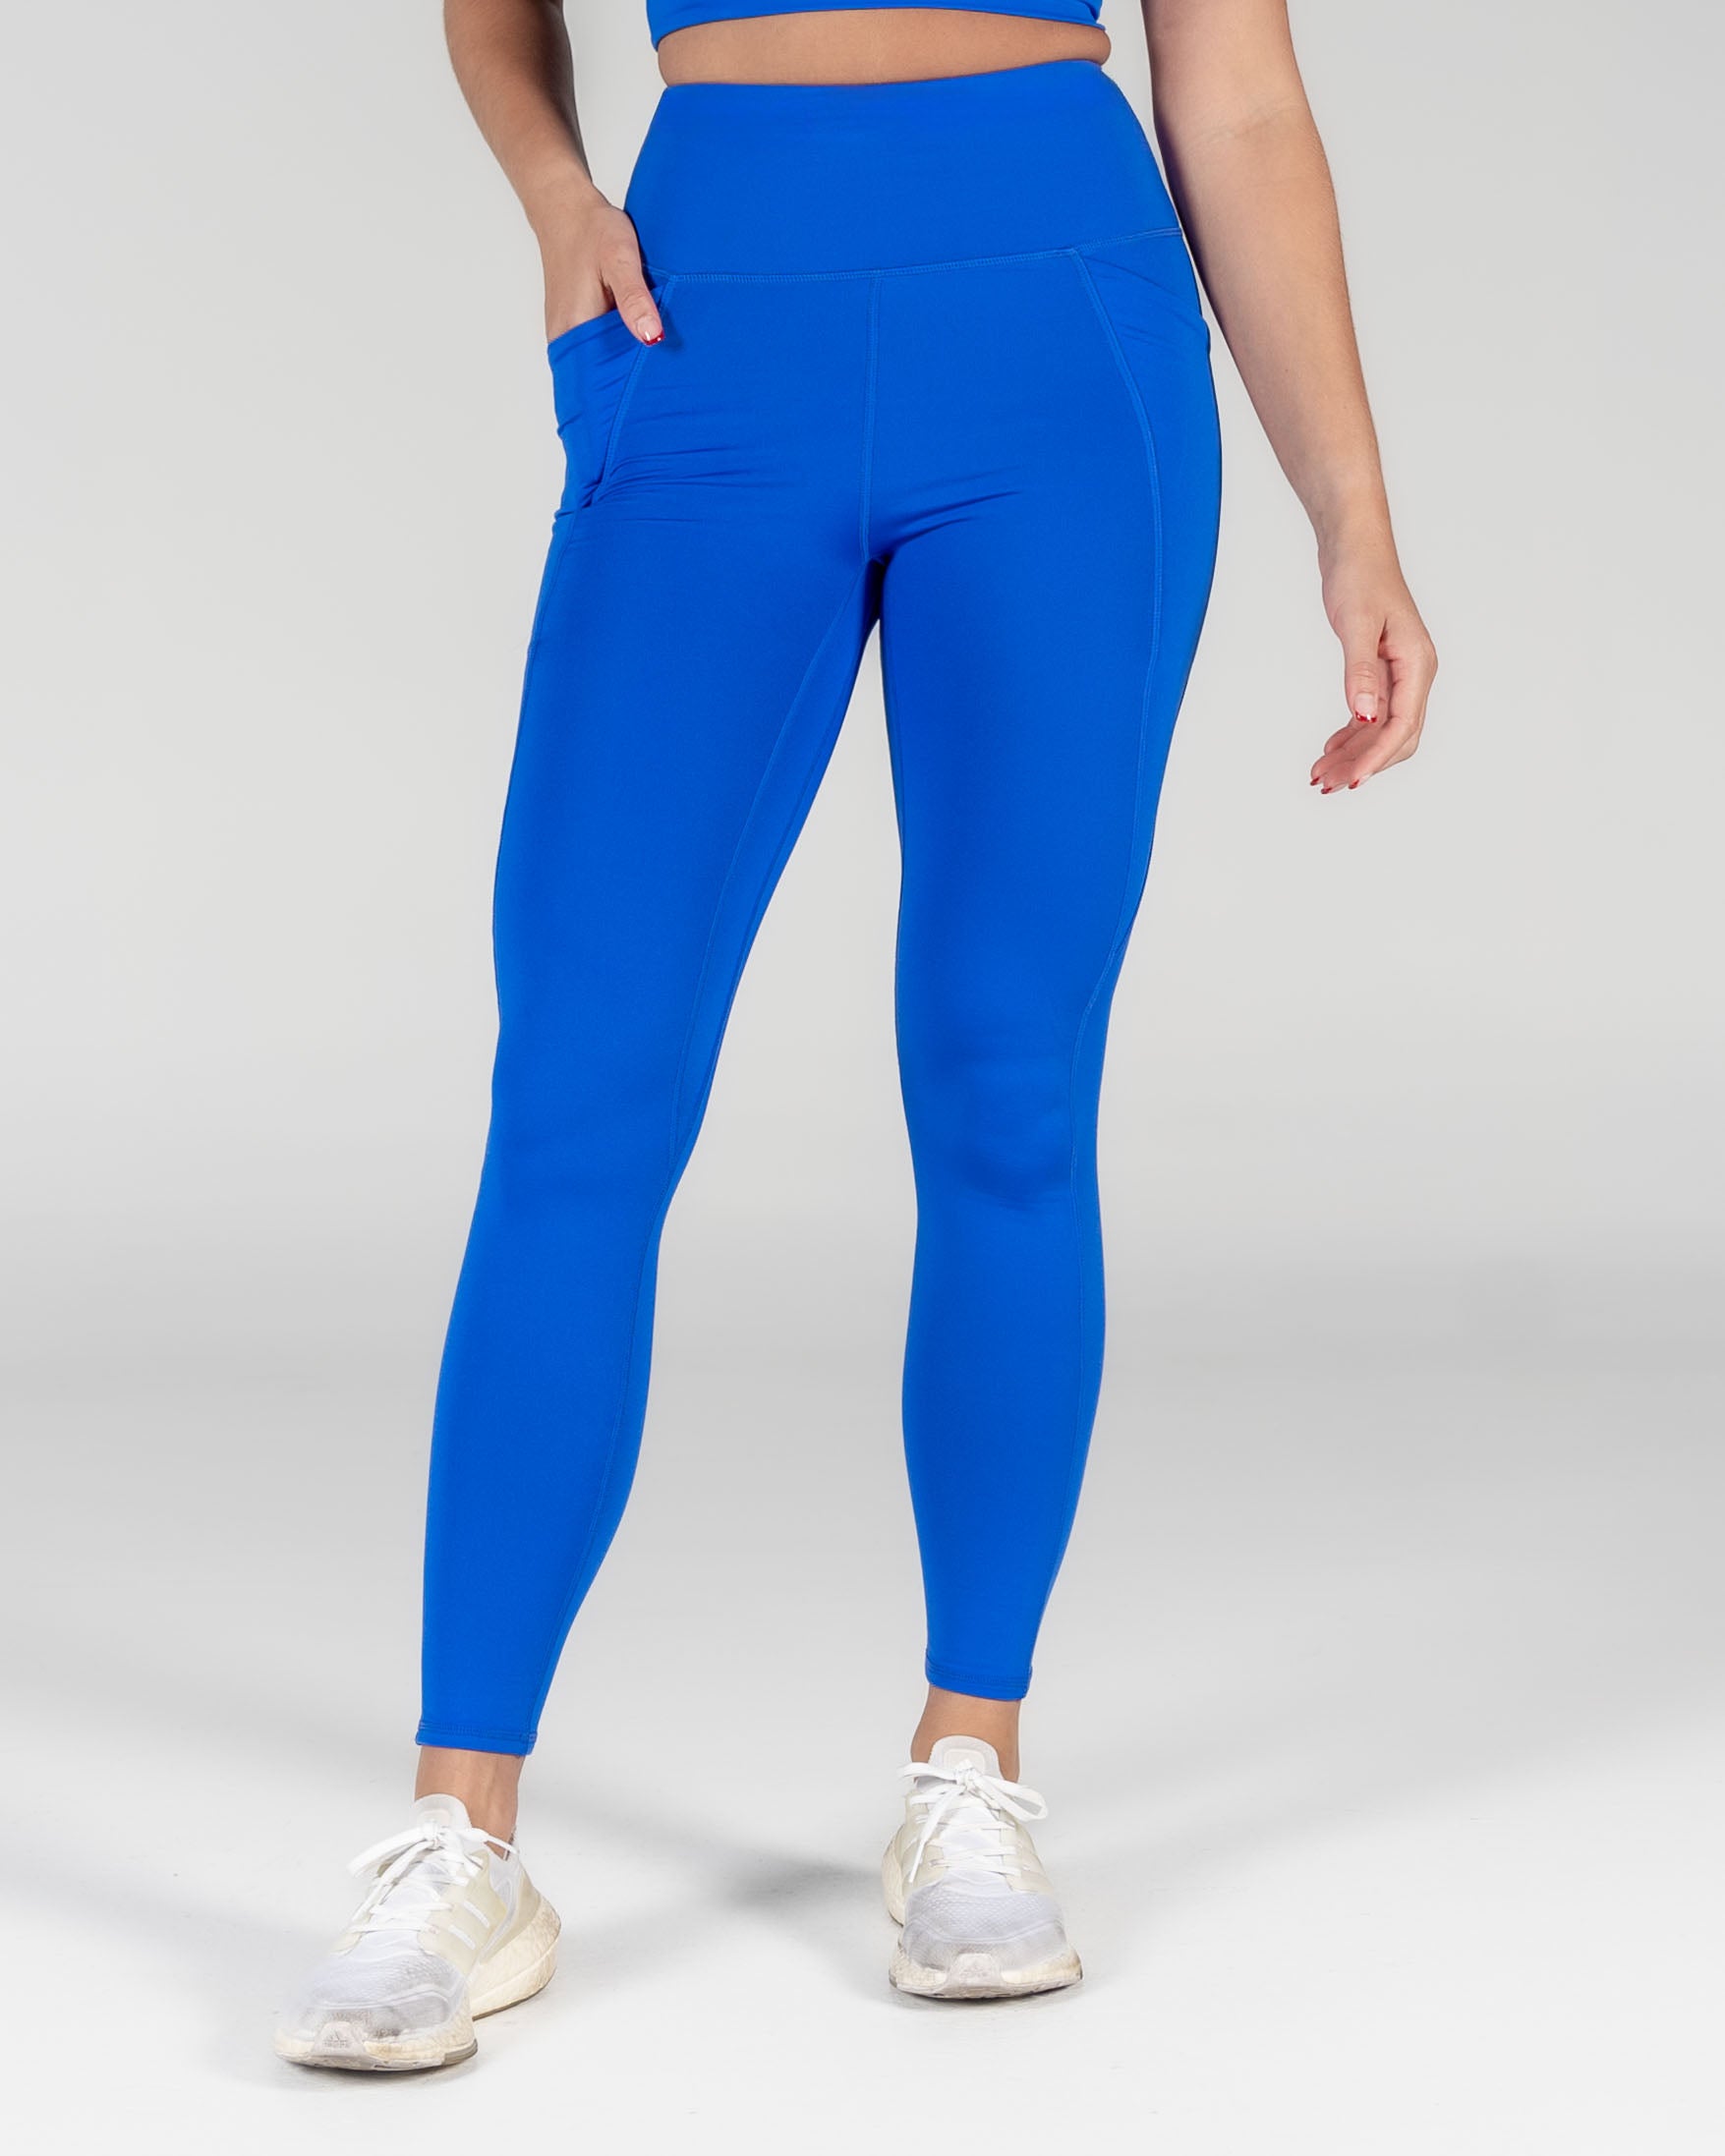 Pour Moi Blue Second Skin Thermal Legging